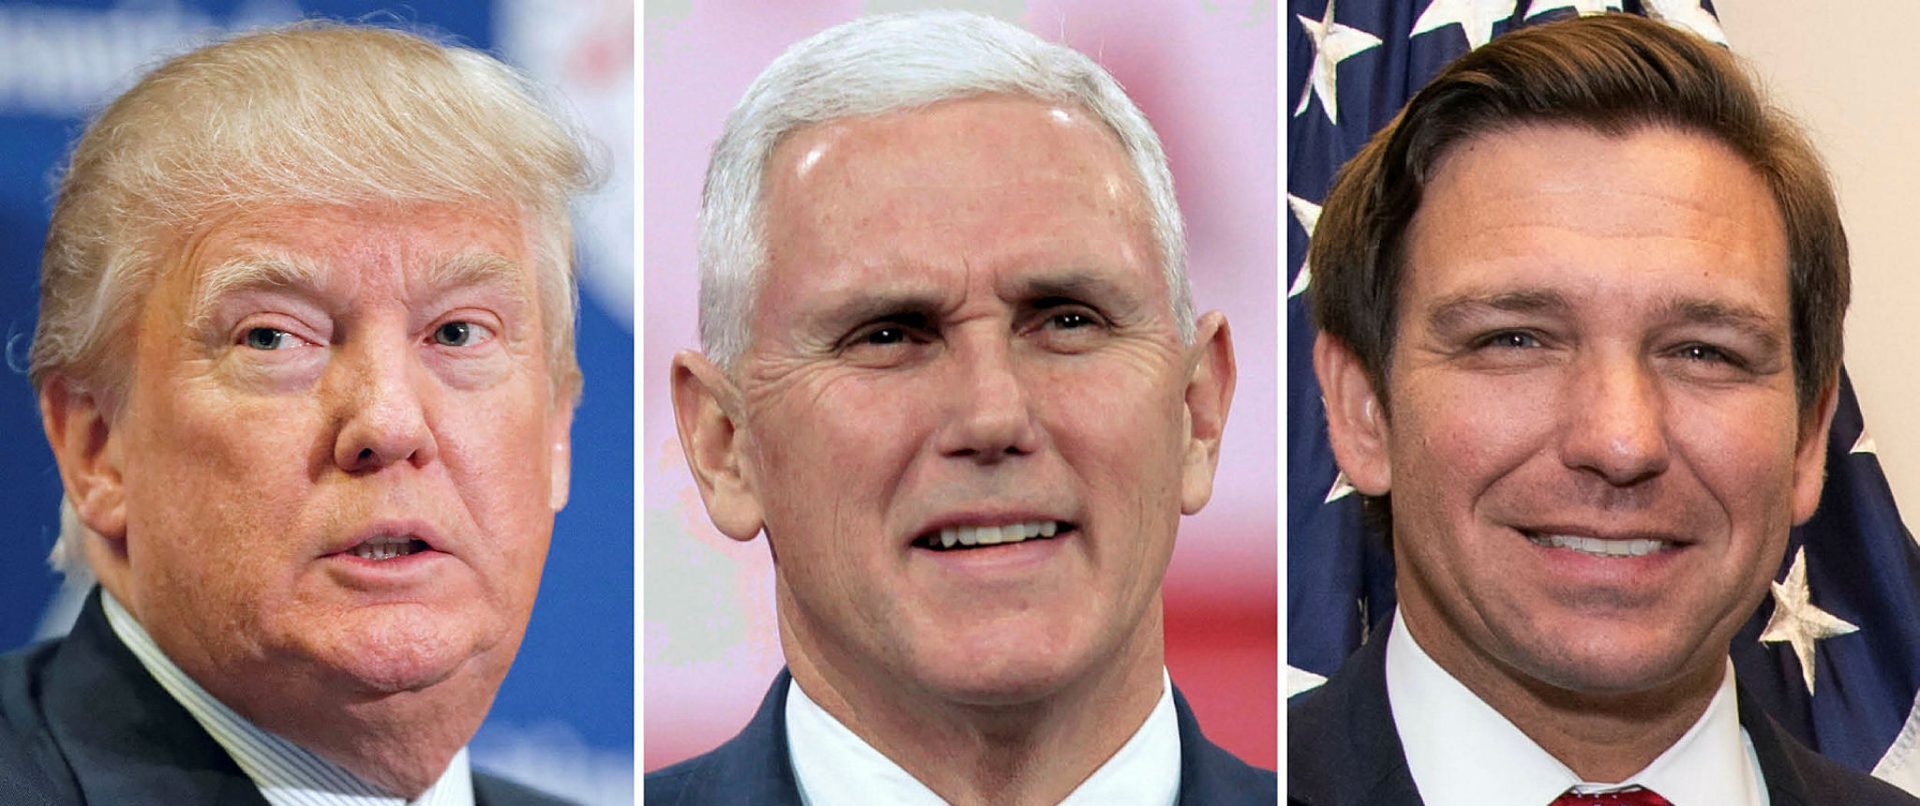 Donald Trump, Mike Pence, and Ron DeSantis. Photographs courtesy of Wikimedia Commons